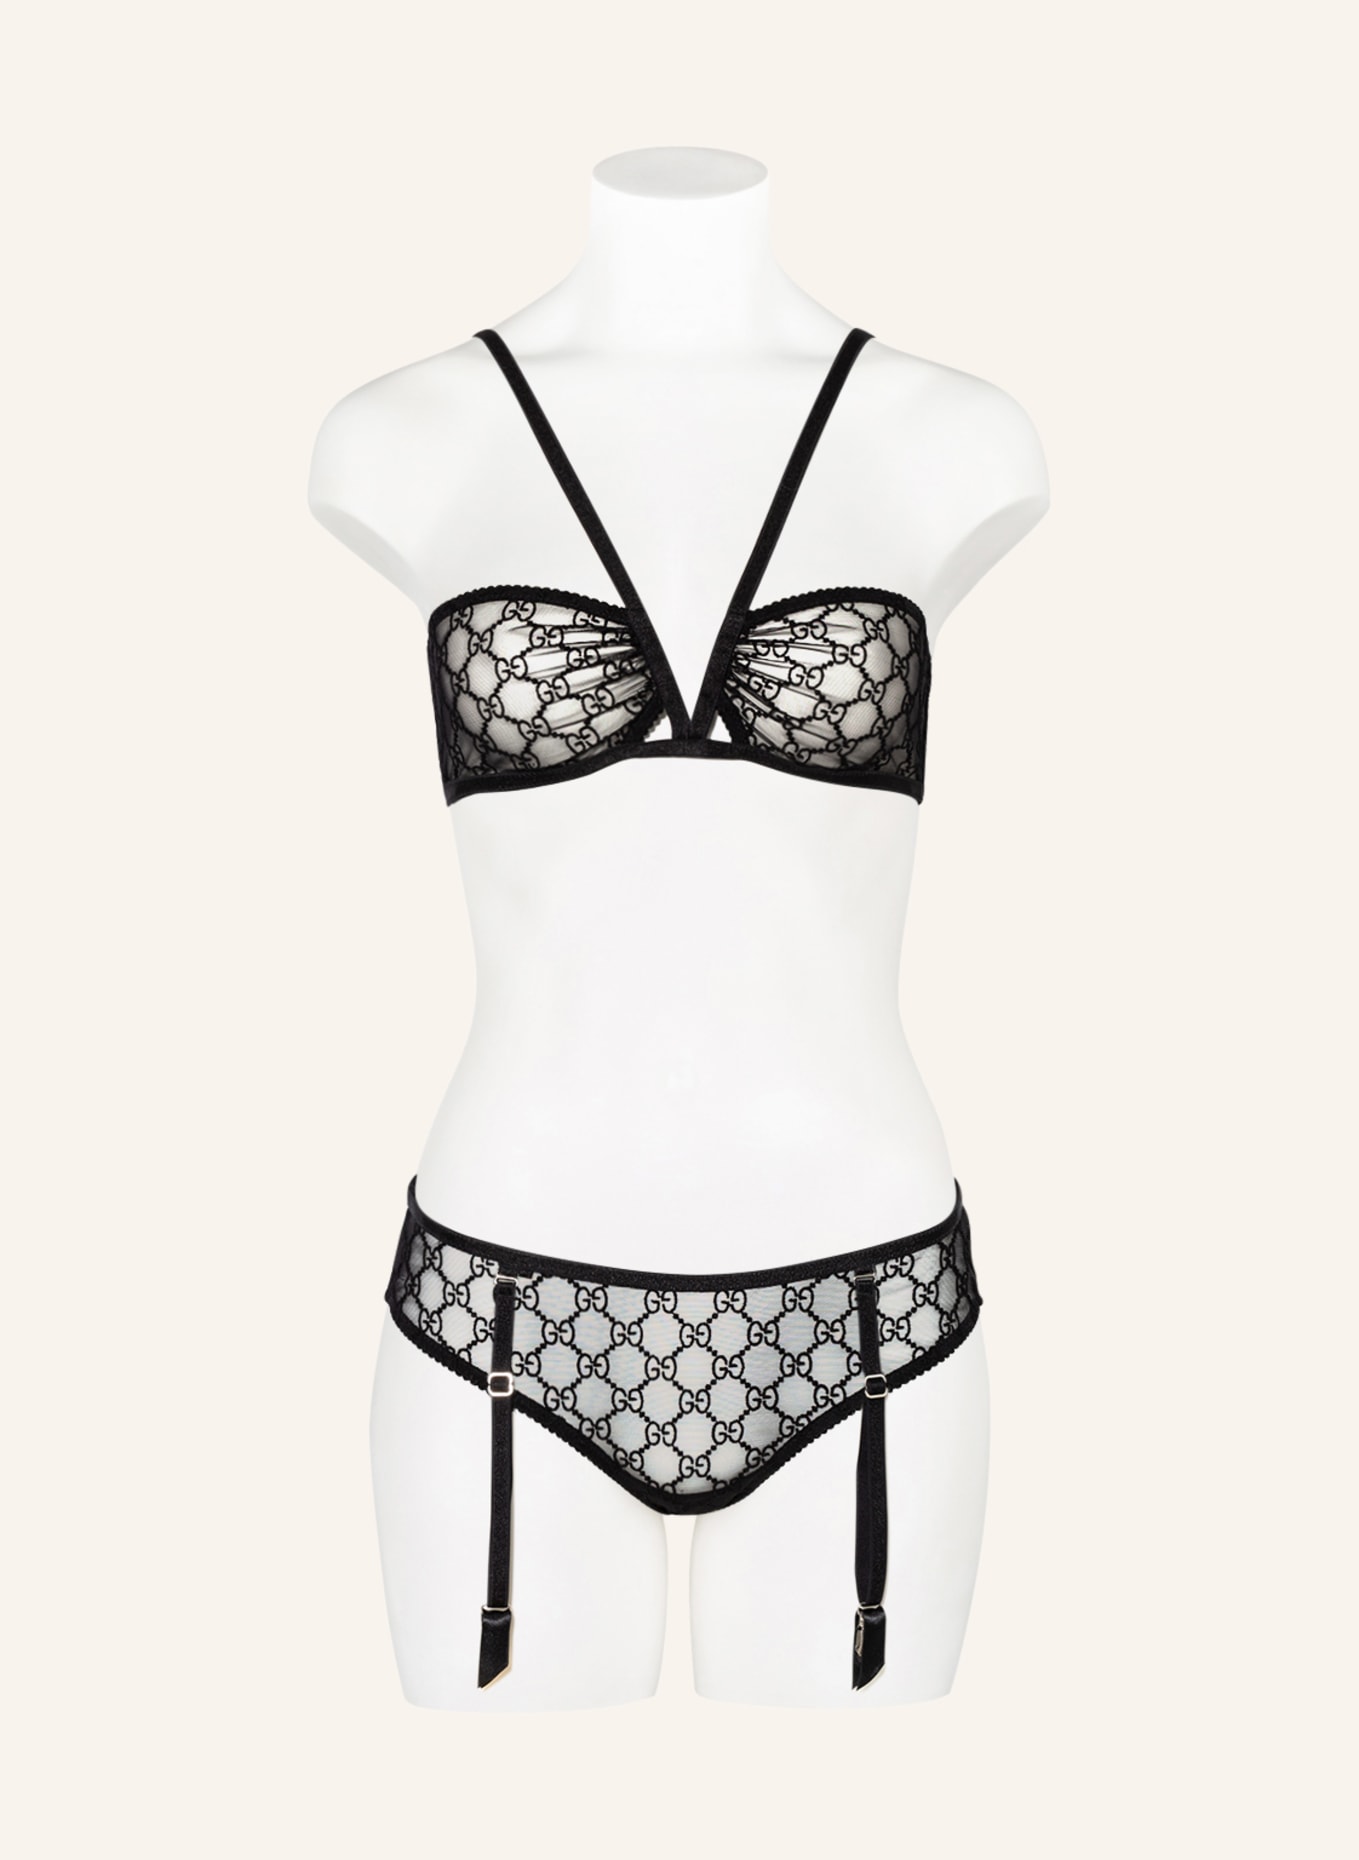 Women's Black Lace And Tulle Lingerie Set by Fendi